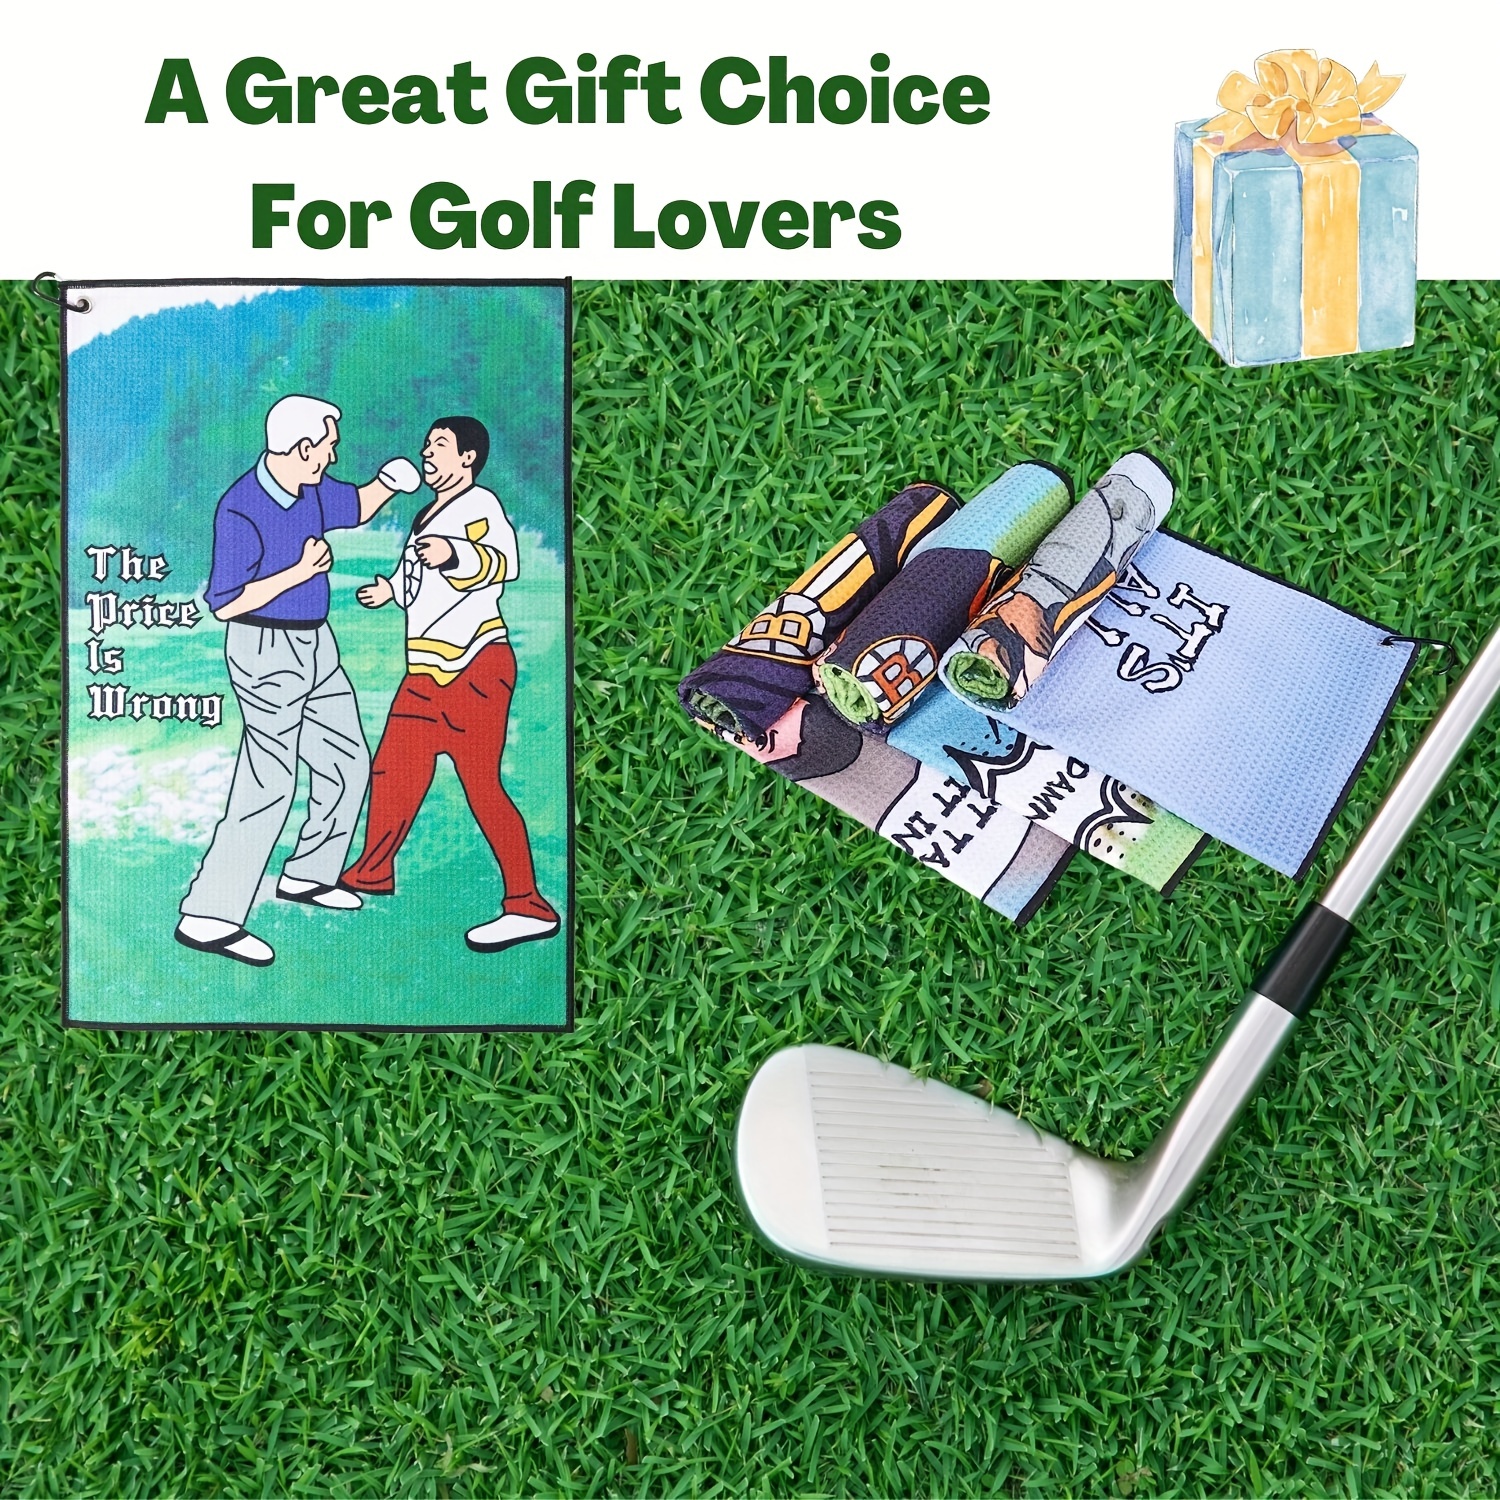 8 FUNNY GOLF GIFTS - BEST GIFTS FOR GOLFERS 